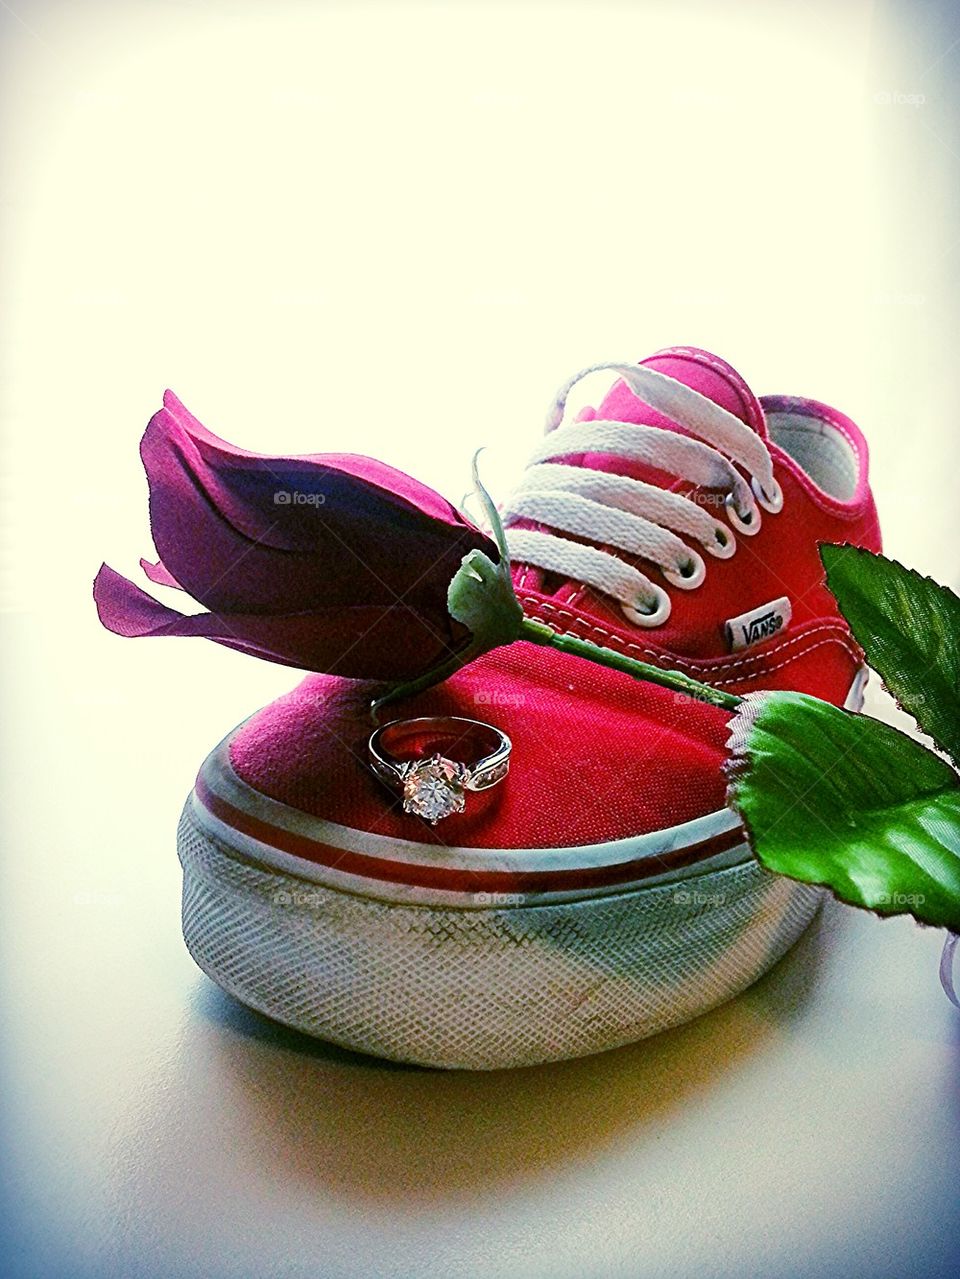 Vans and Roses